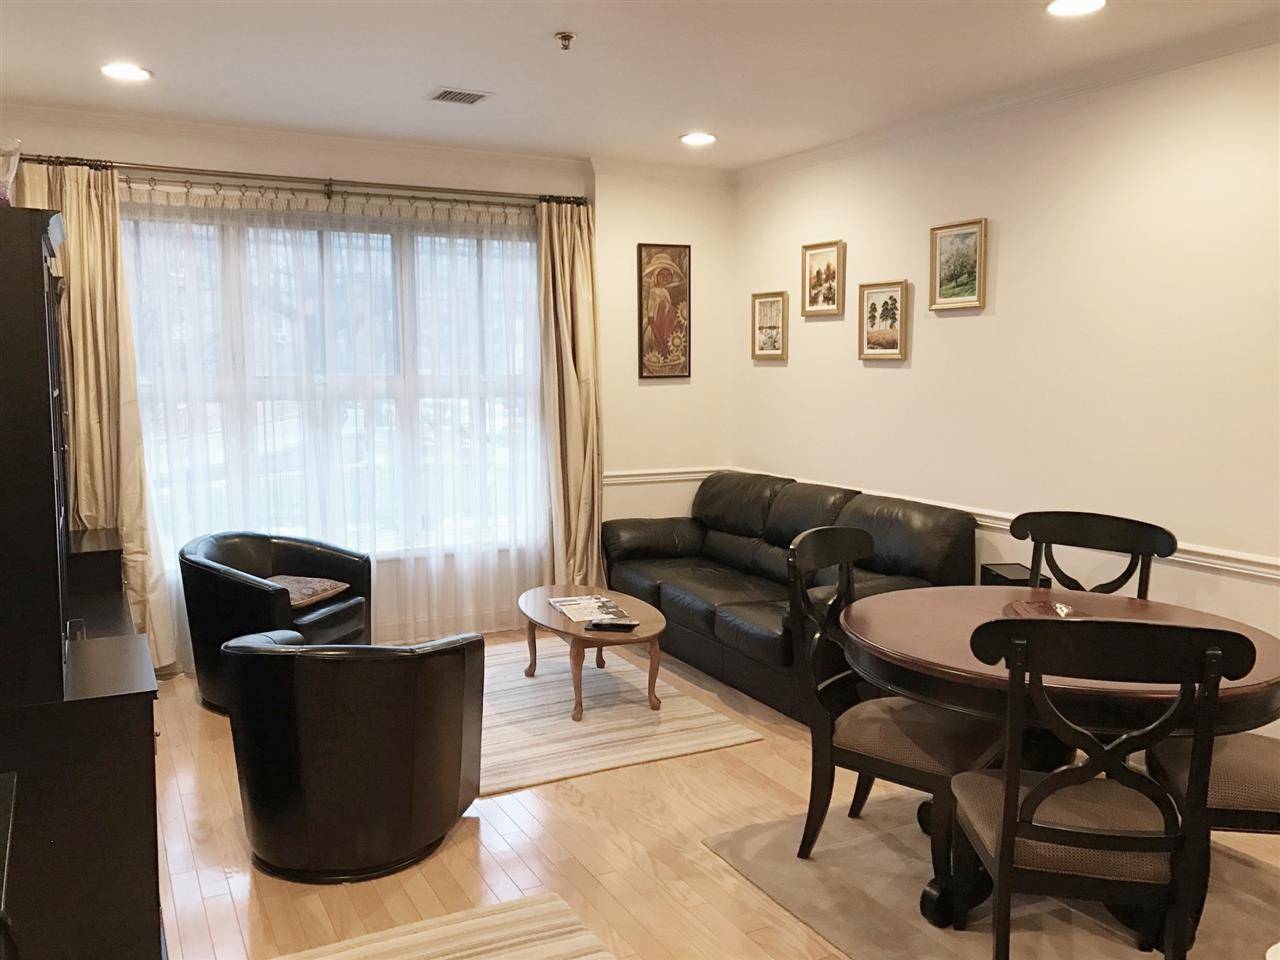 Avail MAY 1 or sooner - 1 BR Hoboken New Jersey